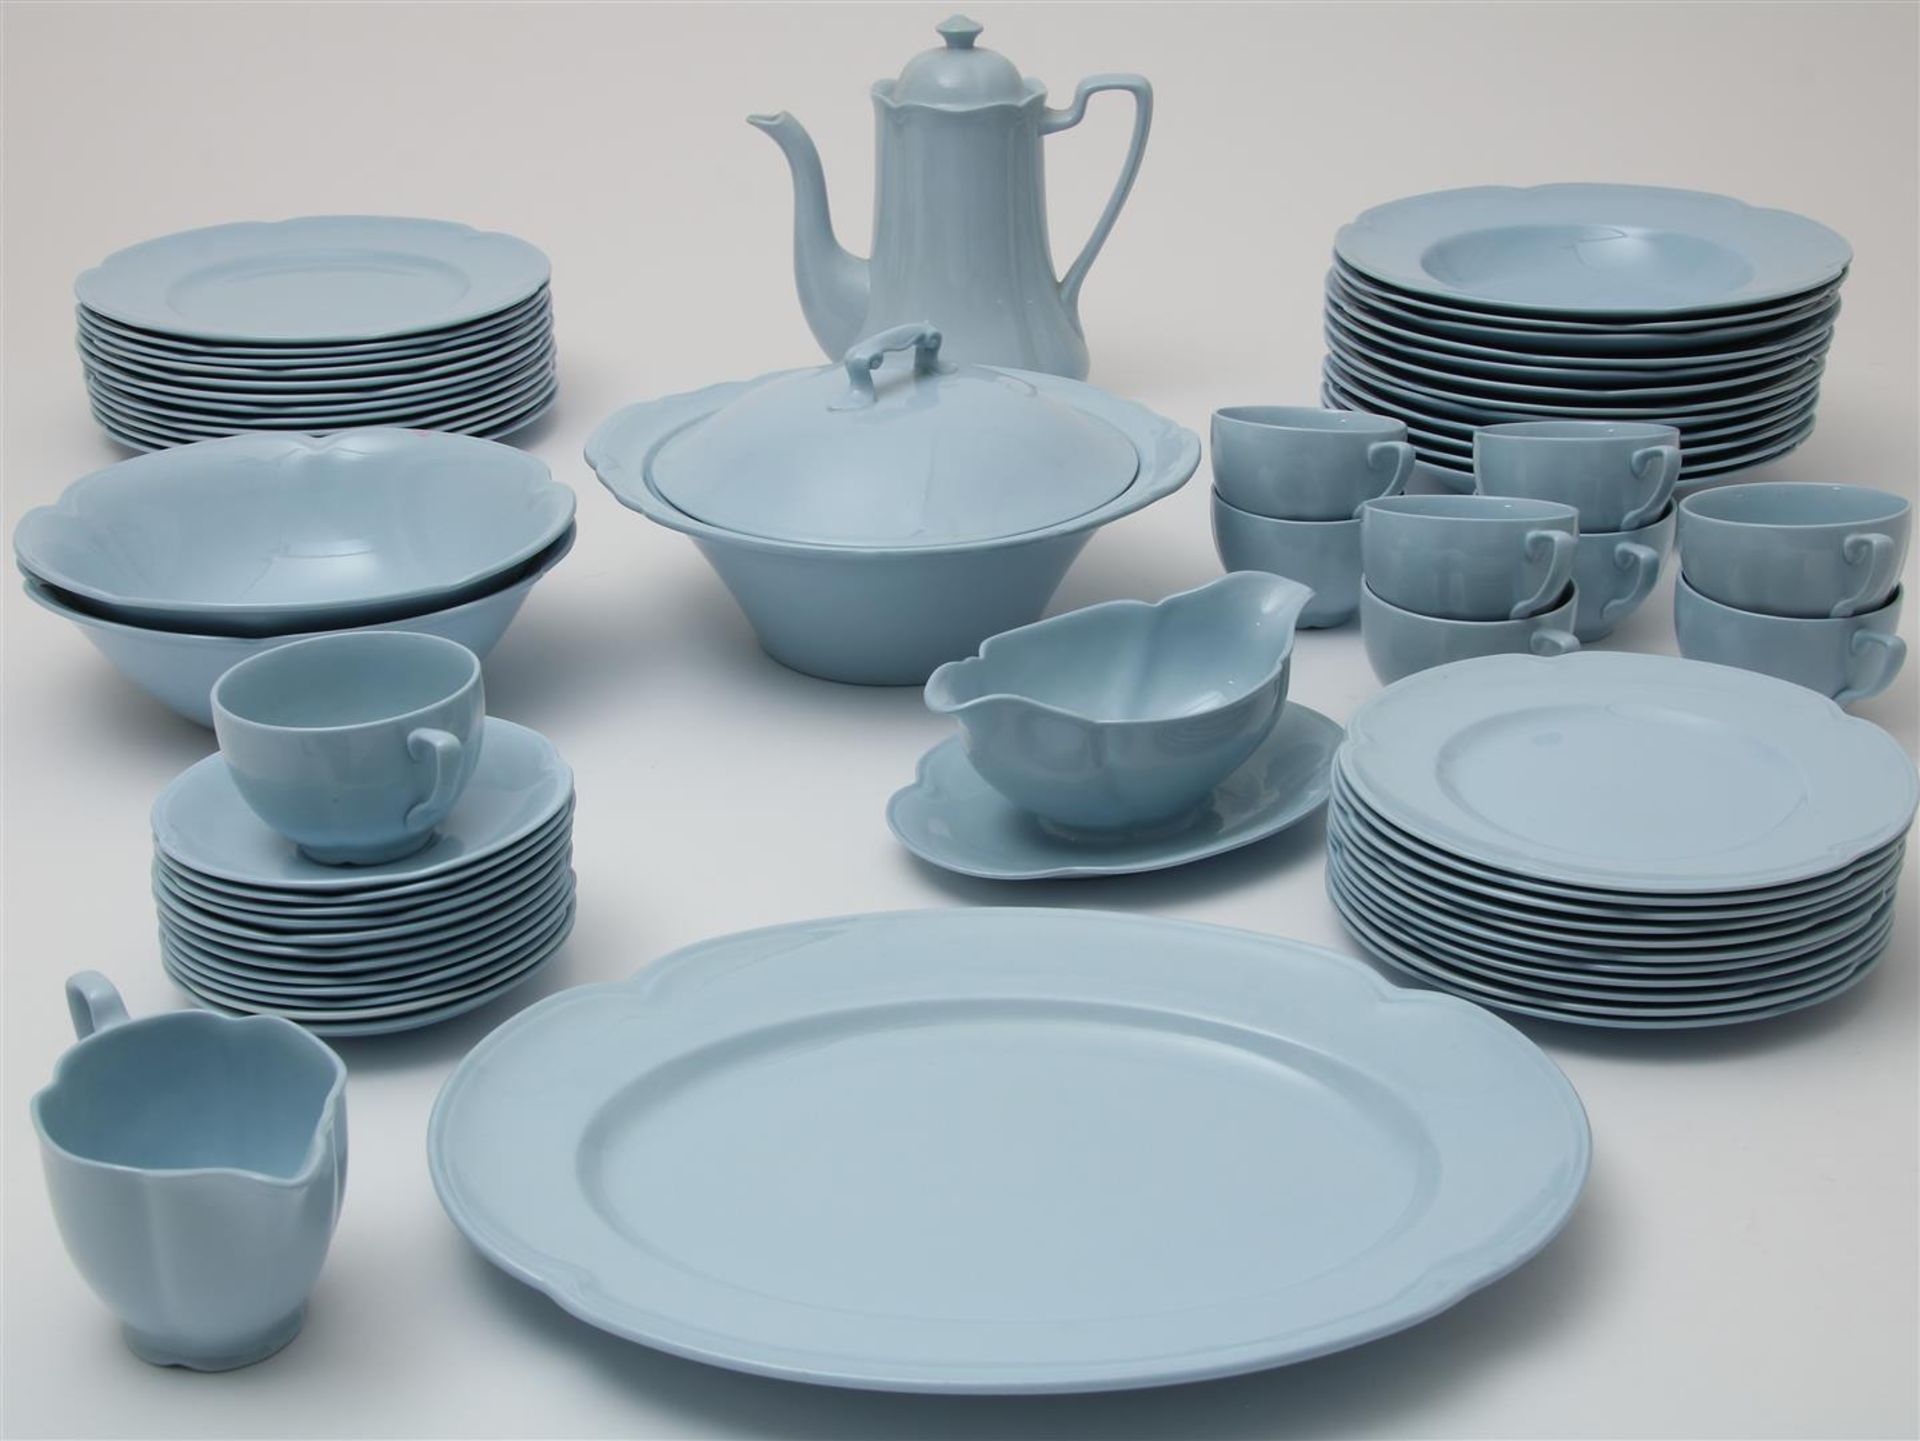 Extensive Greydawn Johnson Bros, Made in England tableware: coffee pot, 9 cups and saucers, milk